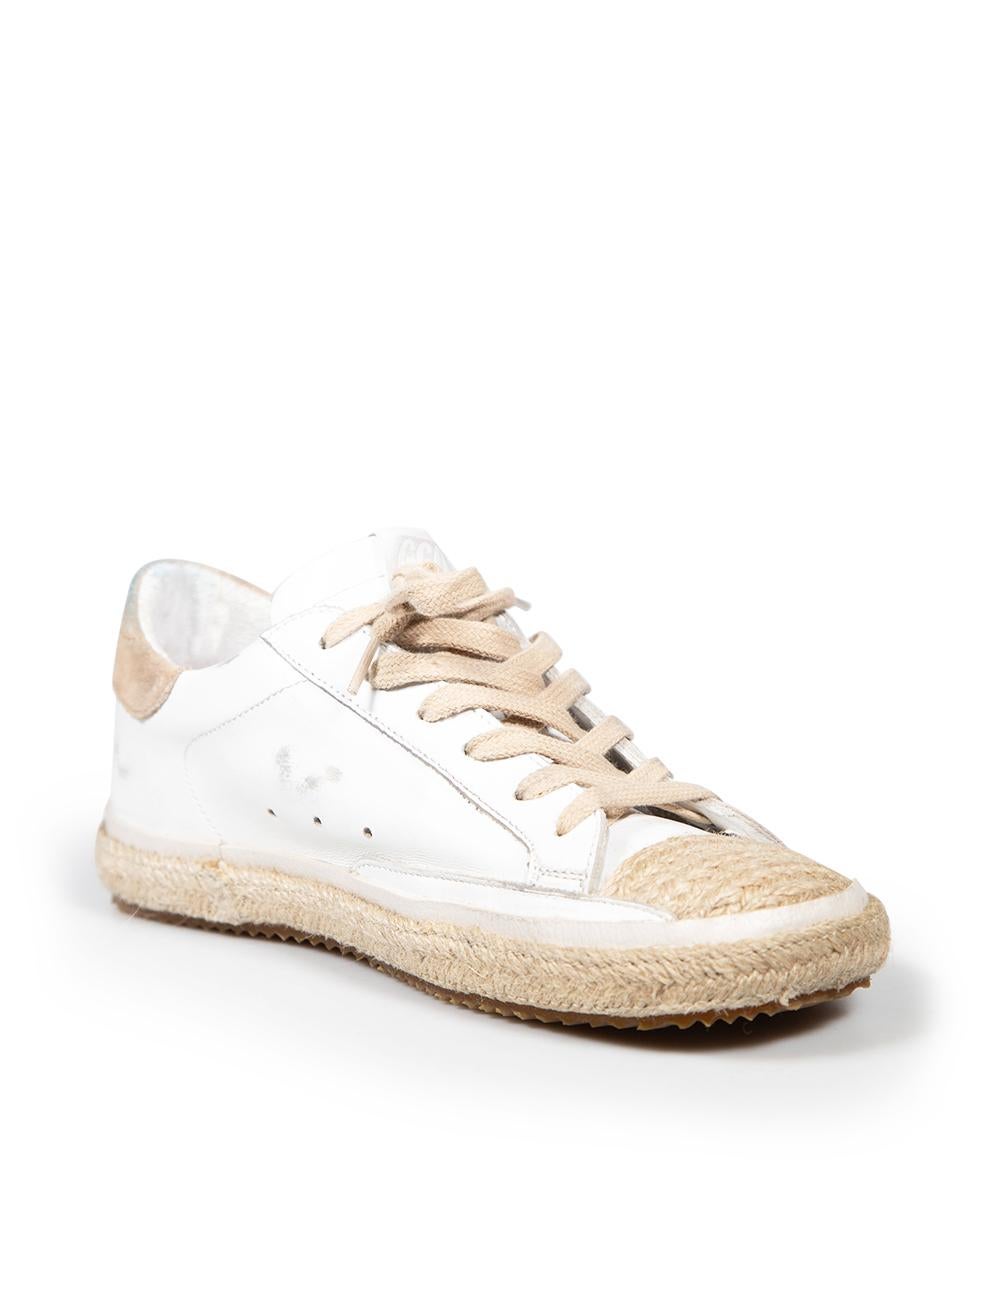 CONDITION is Very good. Hardly any visible wear to trainers is evident on this used Golden Goose designer resale item. Please note that these shoes are purposely distressed.
 
 
 
 Details
 
 
 Model: Superstar 
 
 White
 
 Leather
 
 Trainers
 
